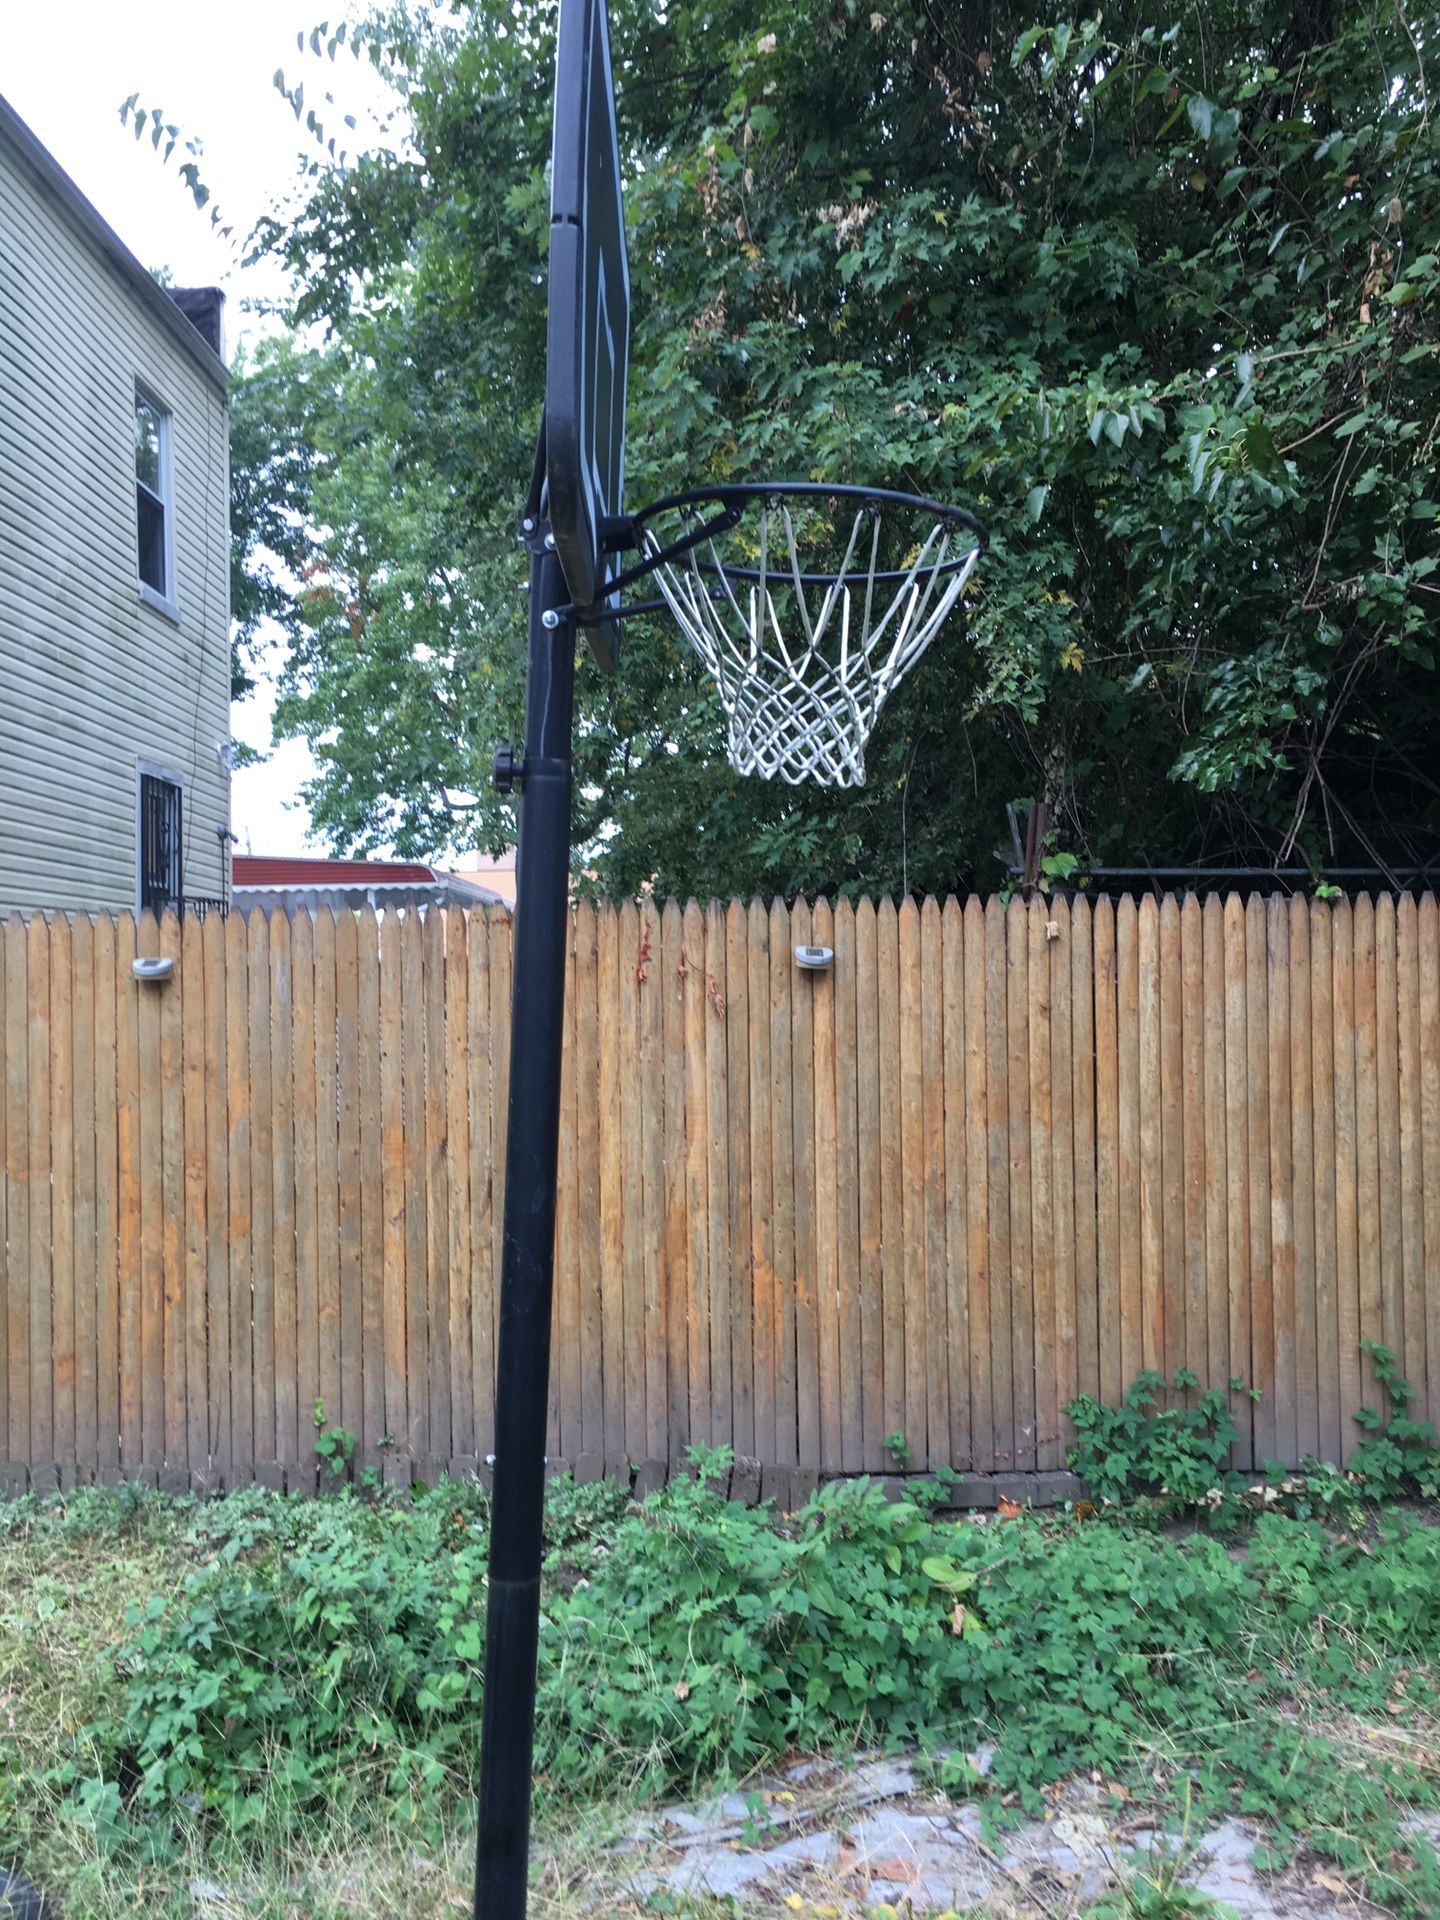 Basketball poll with net. Base included